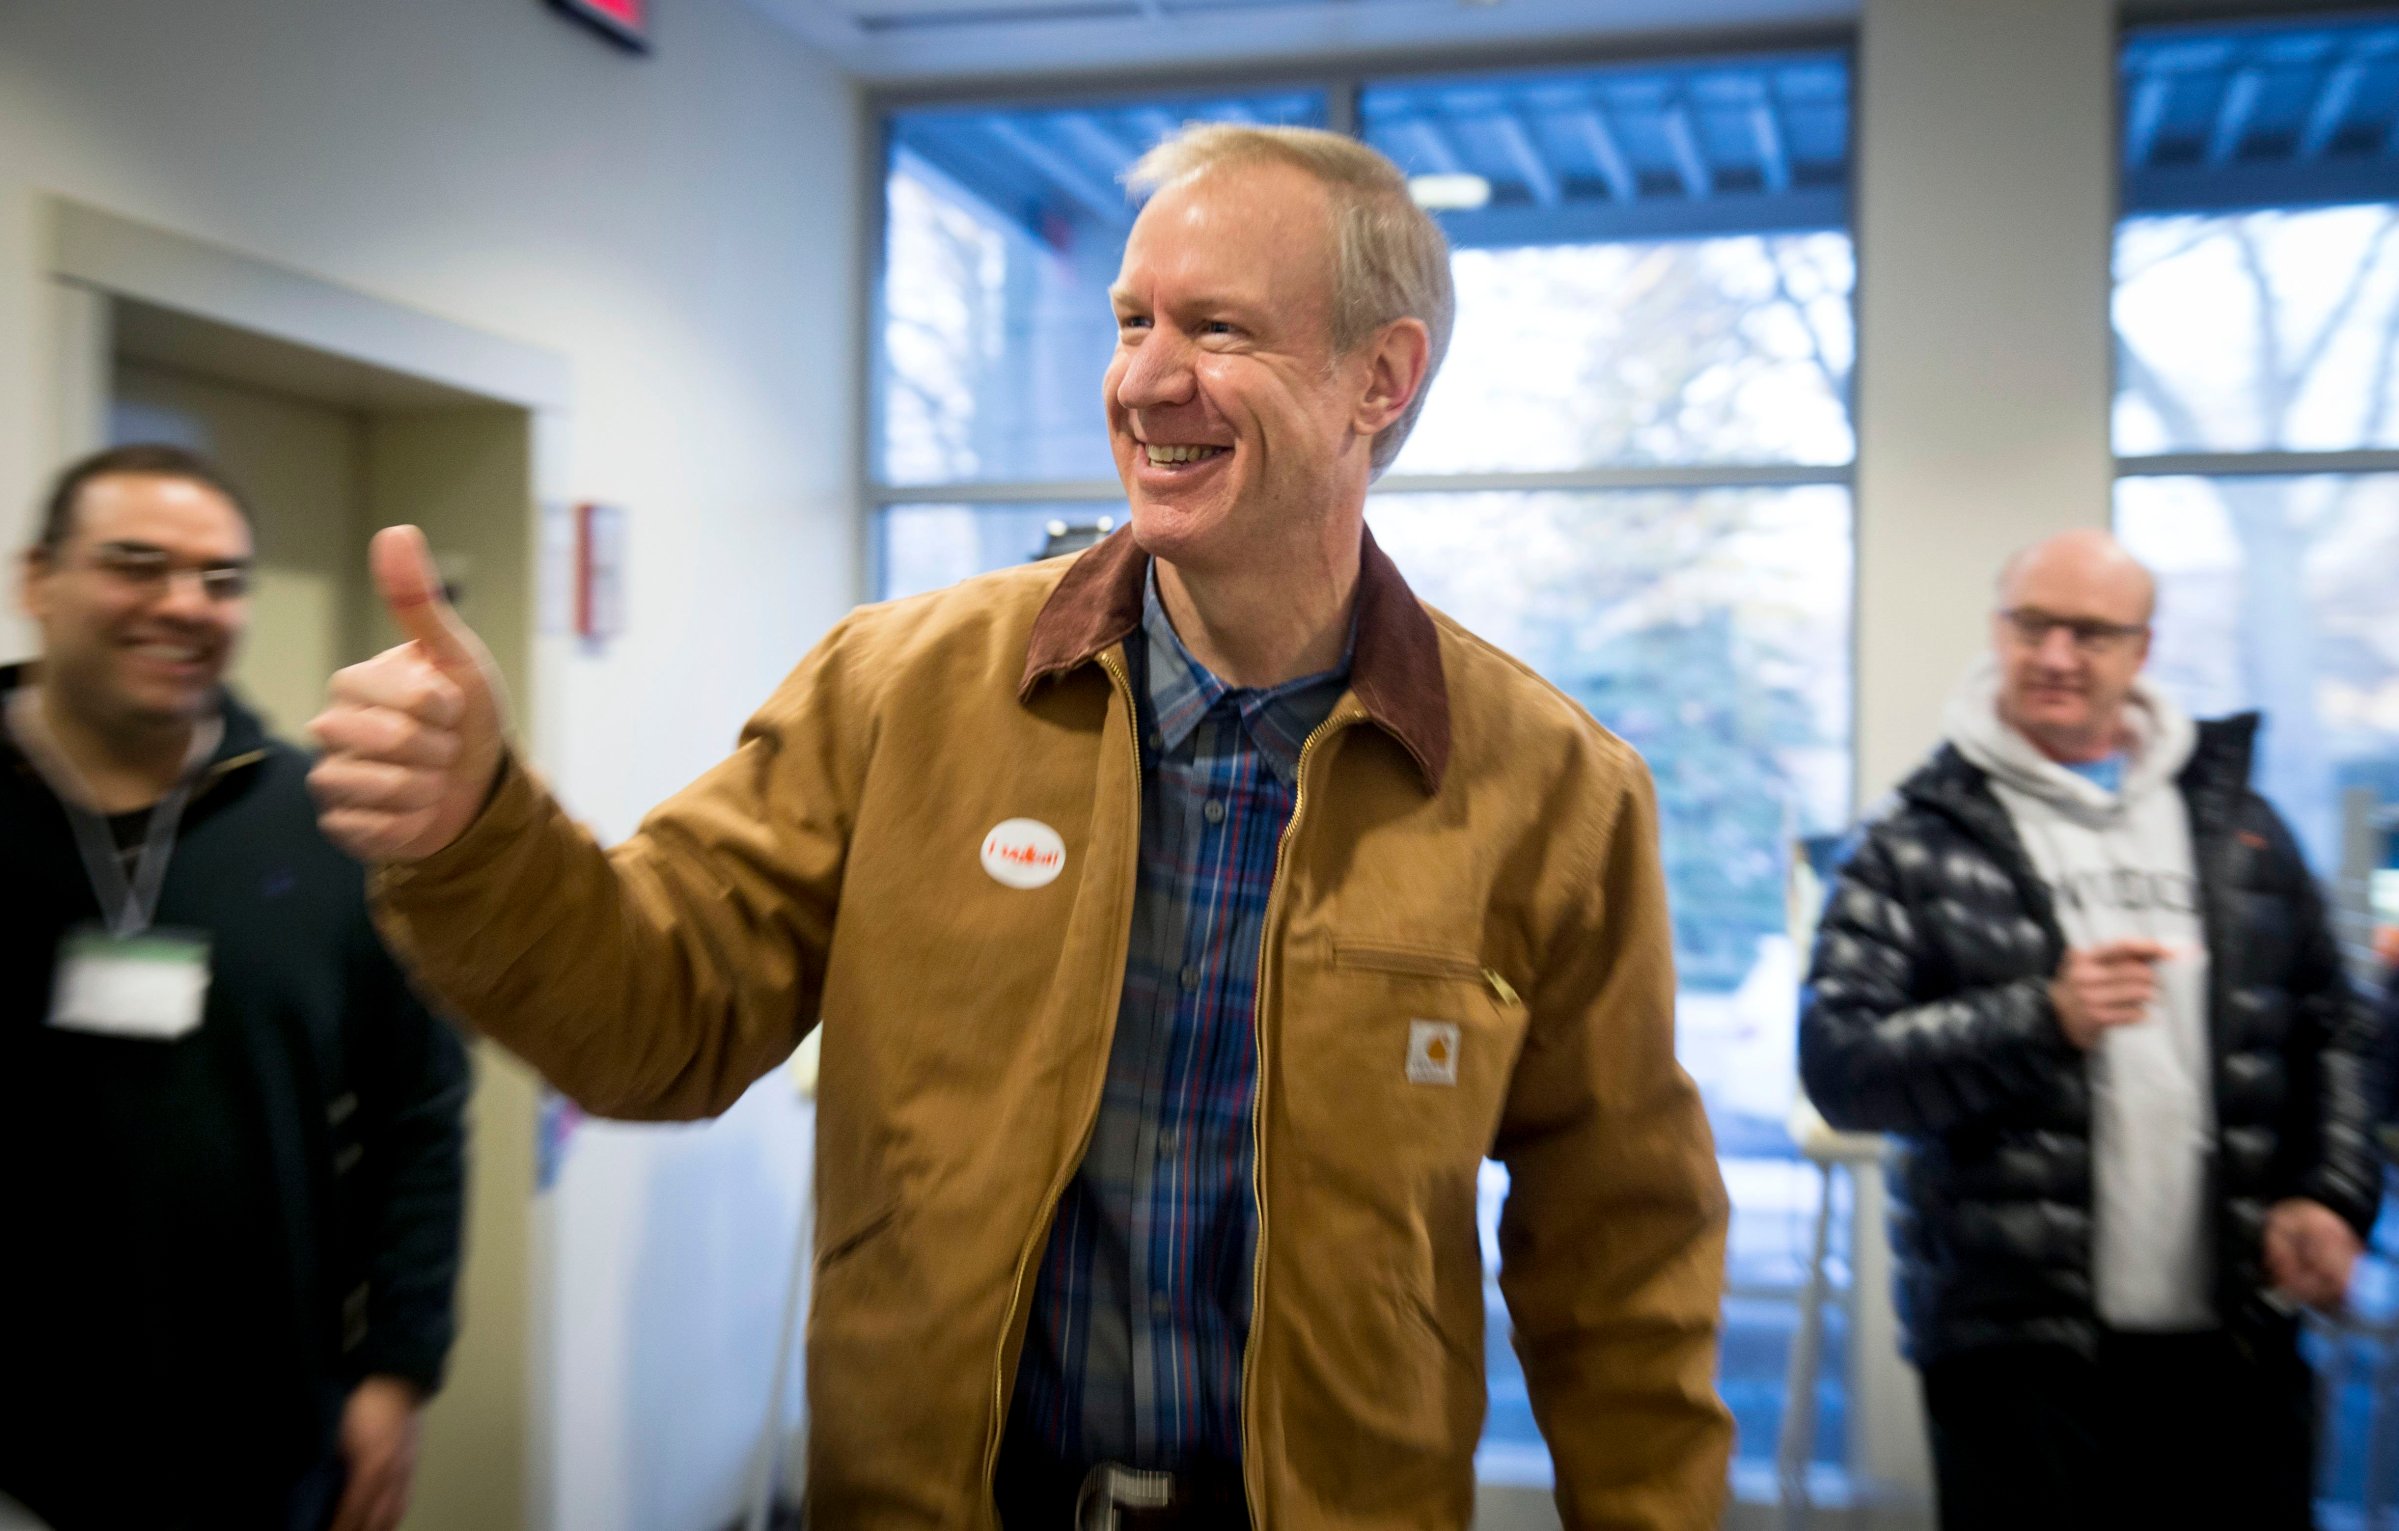 Illinois Republican gubernatorial candidate Bruce Rauner exits the polling place after voting in Winnetka, Ill.